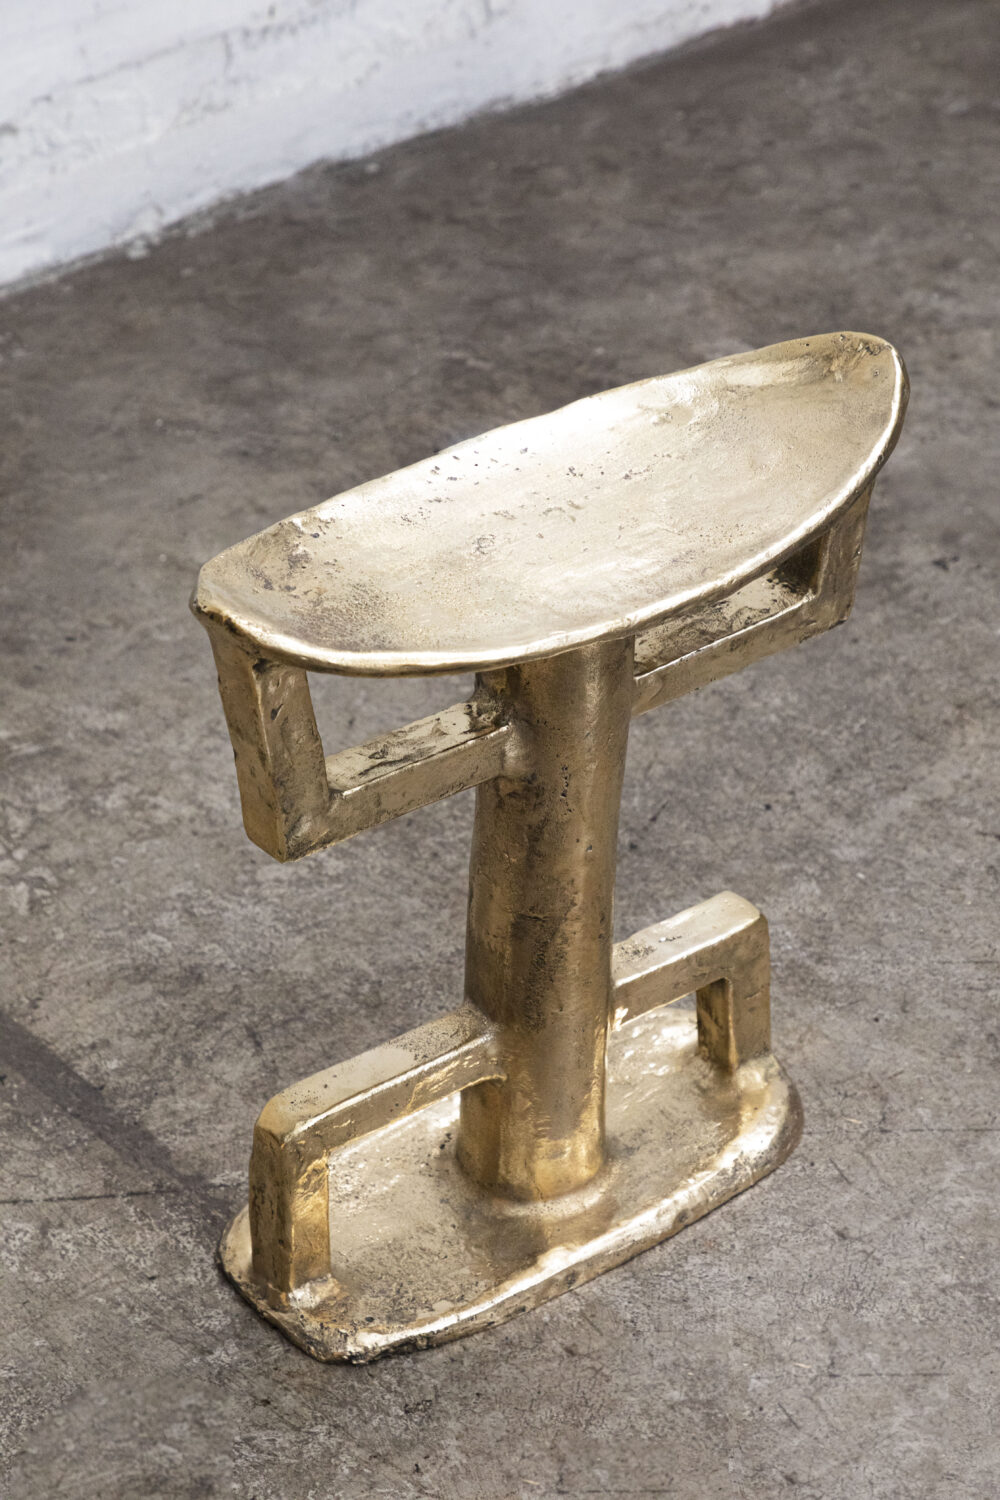 Casted Bronze Stool 2, 2022